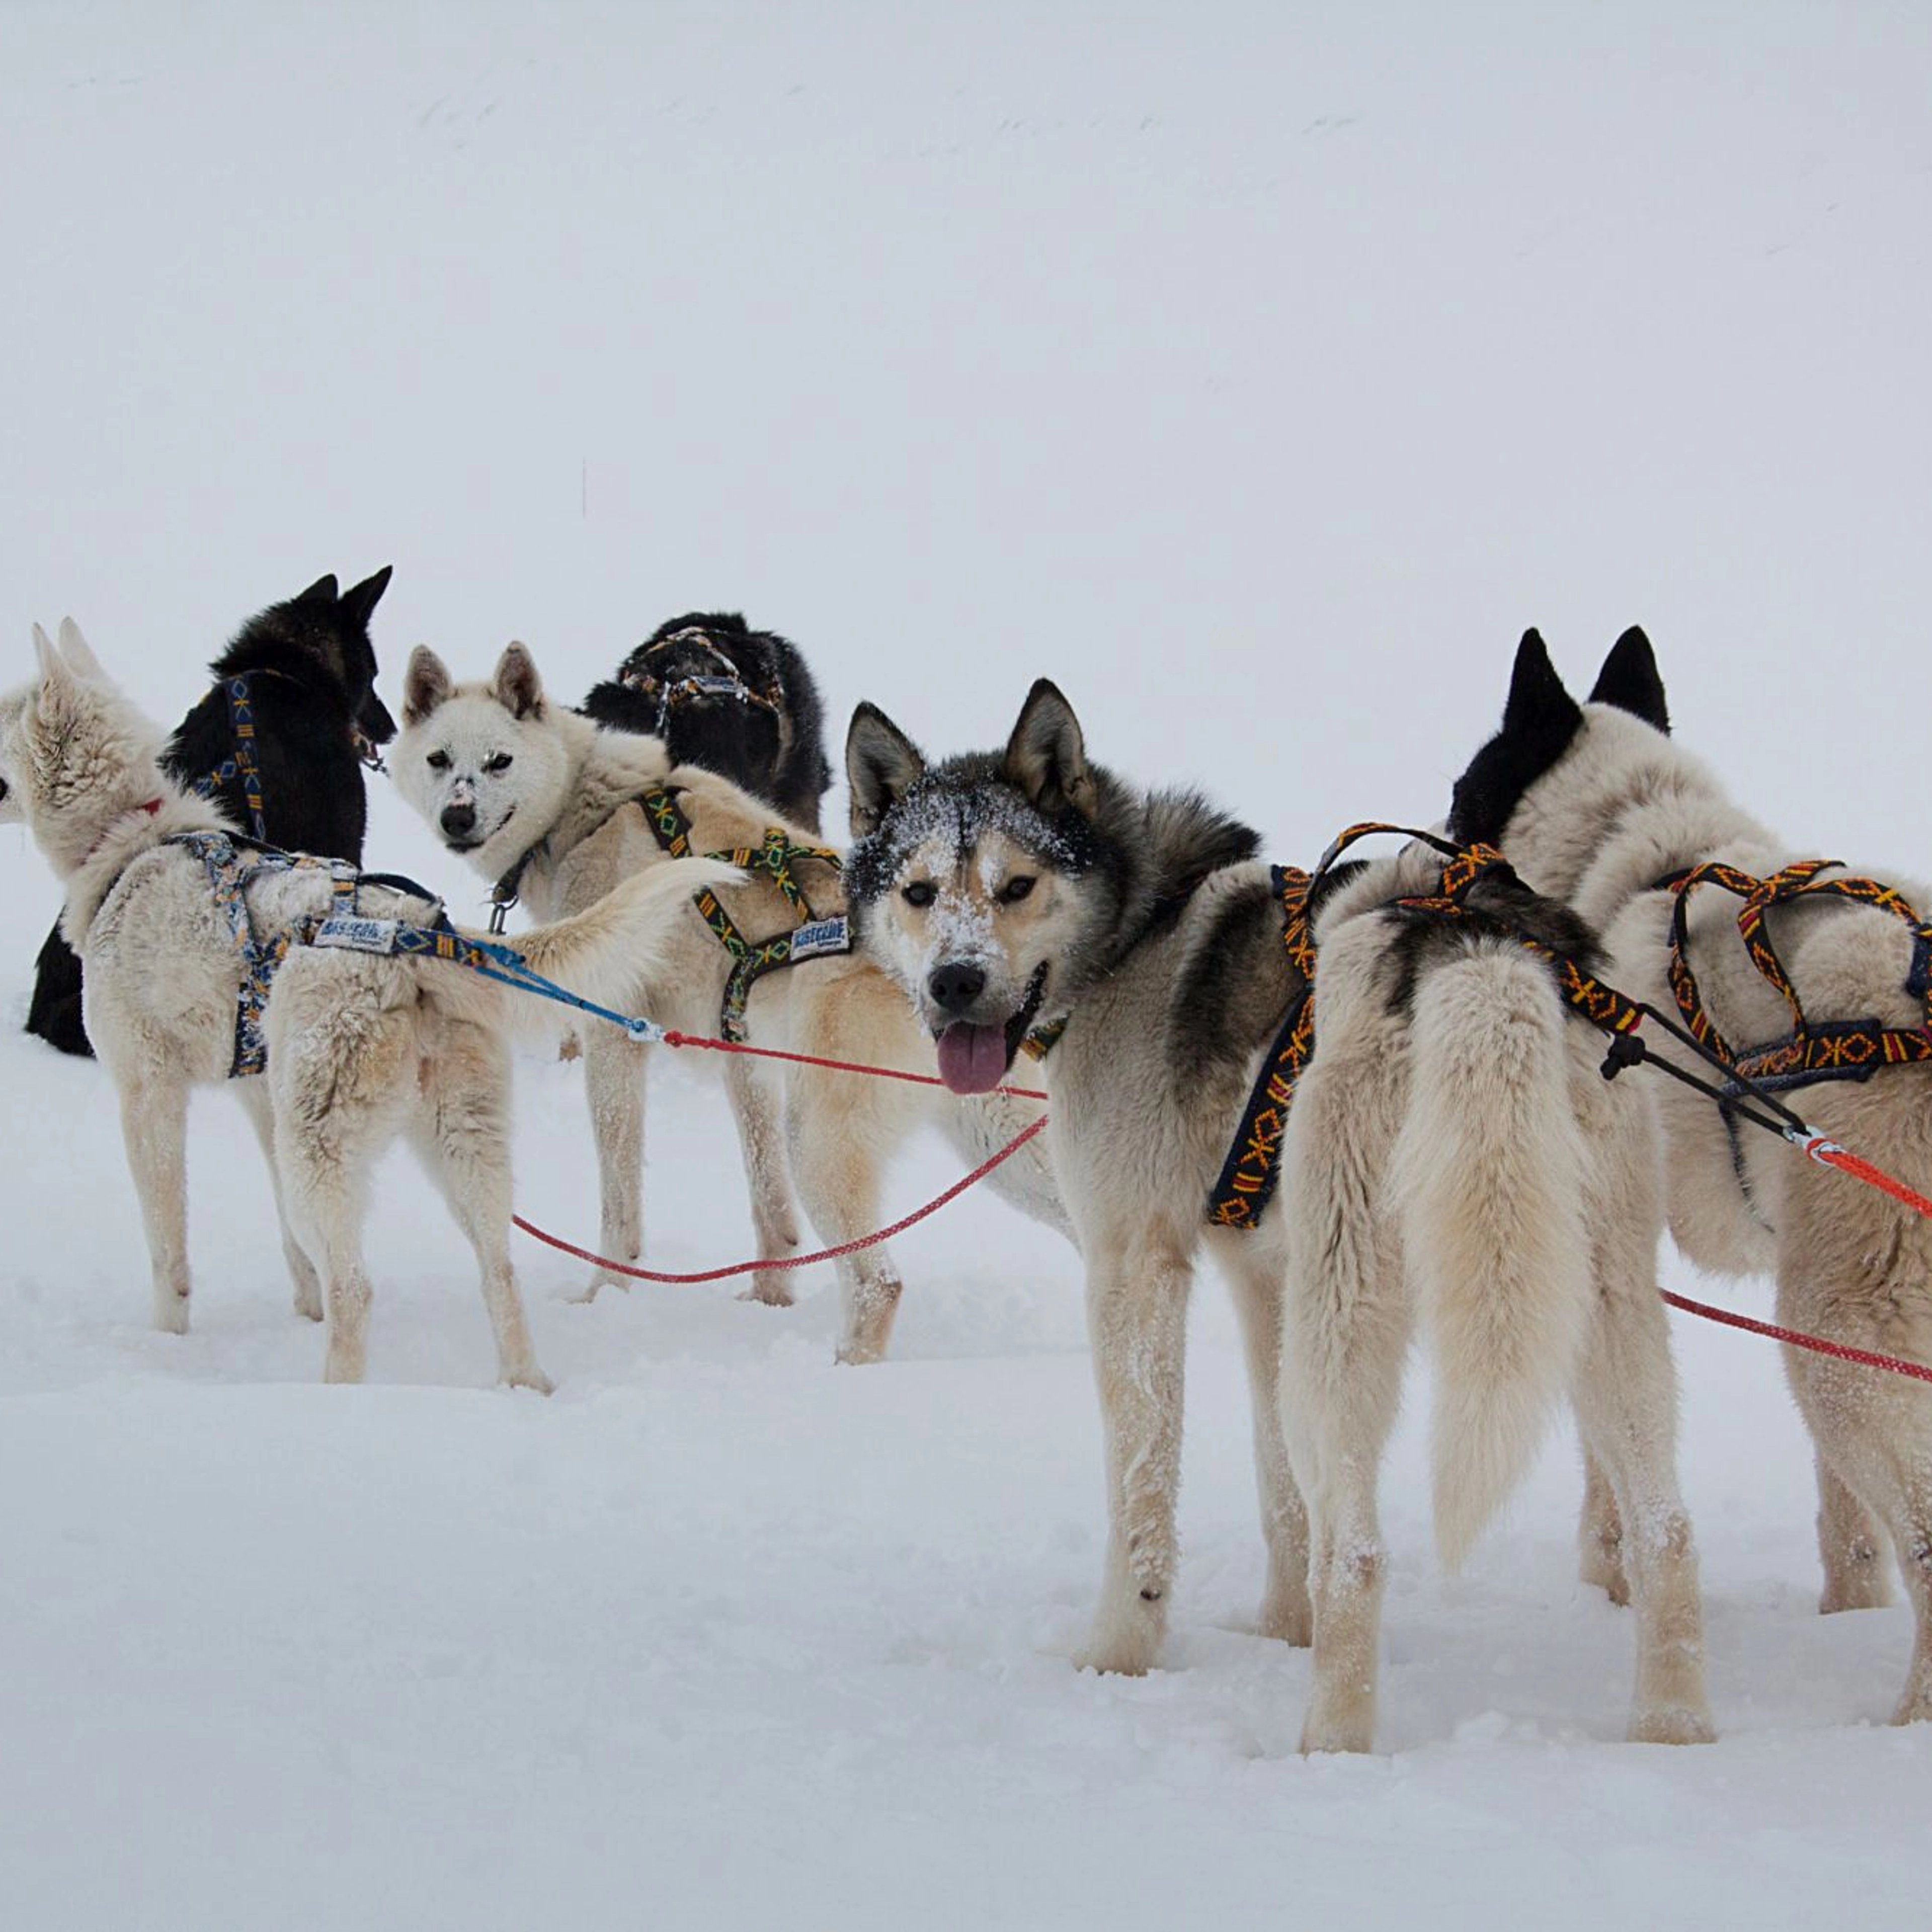 Dogs ready for sledding  - Bodø, Norway